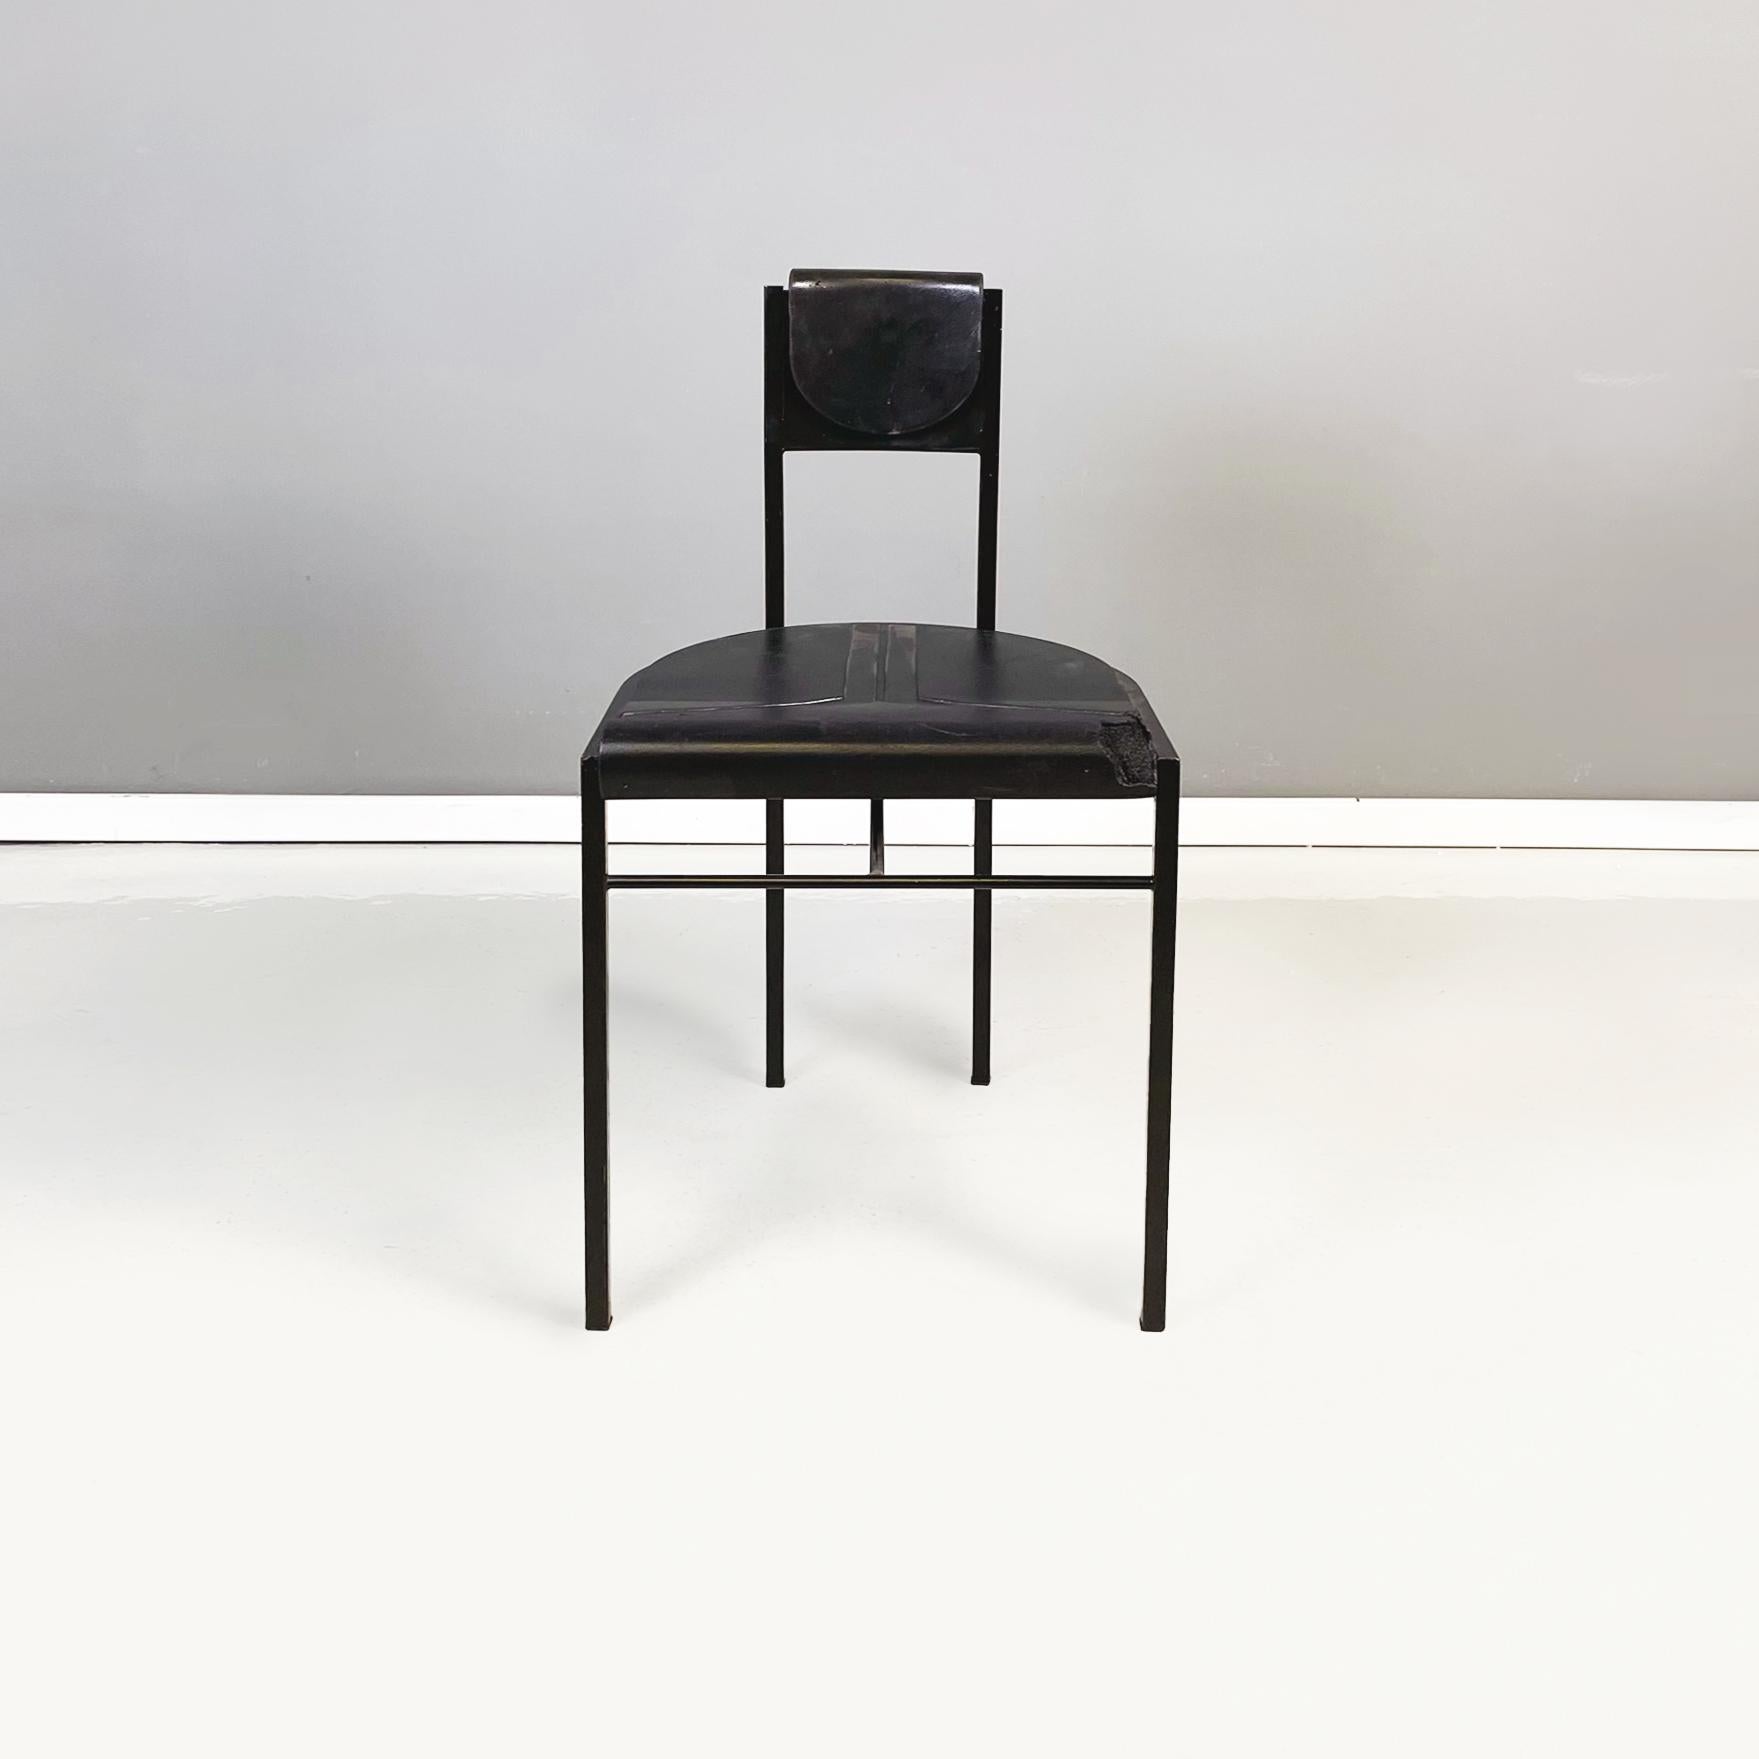 Italian modern Black metal and rubber Chair by Zeus, 1990s
Chair with semi-oval seat and back in black rubber. The structure has a square section in matt black painted metal.
Produced by Zeus in 1990s.
Vintage condition. The chair has several